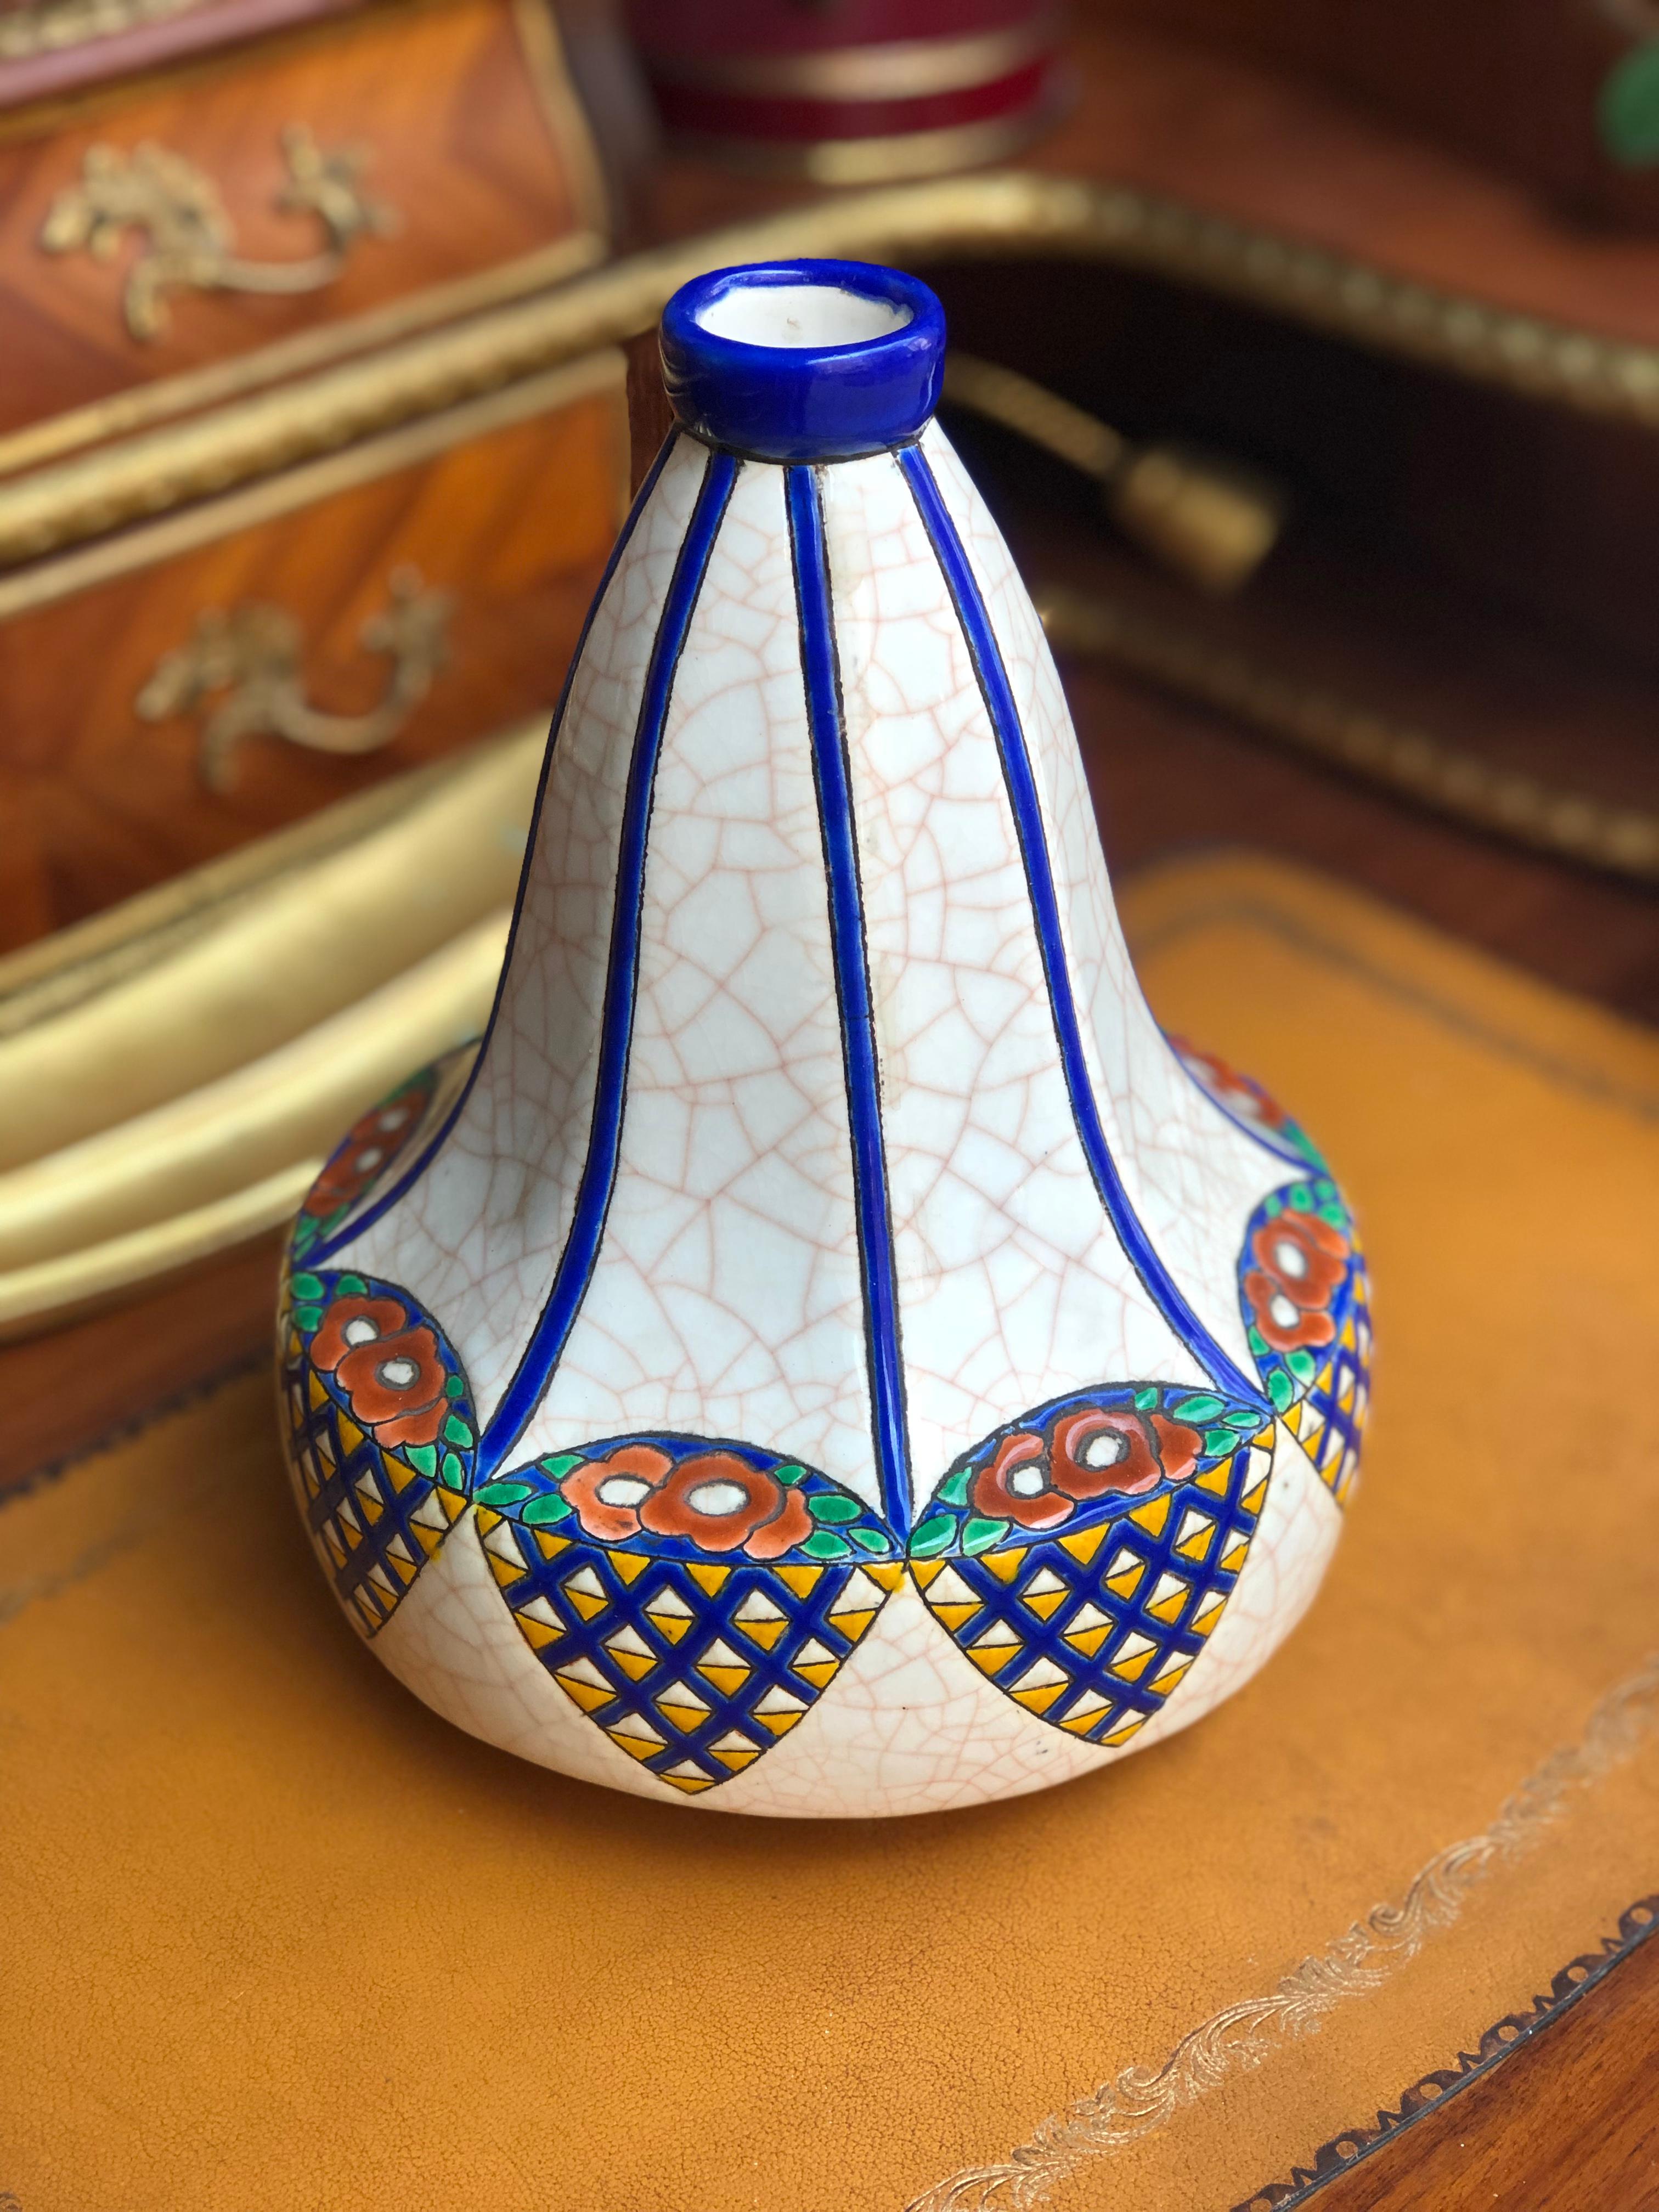 Longwy
Piriform Art Deco vase with cut sides in faience, decoration of floral and geometric friezes, polychrome cloisonné enamels, crackled cream base, signed, model D 5053,
circa 1930.